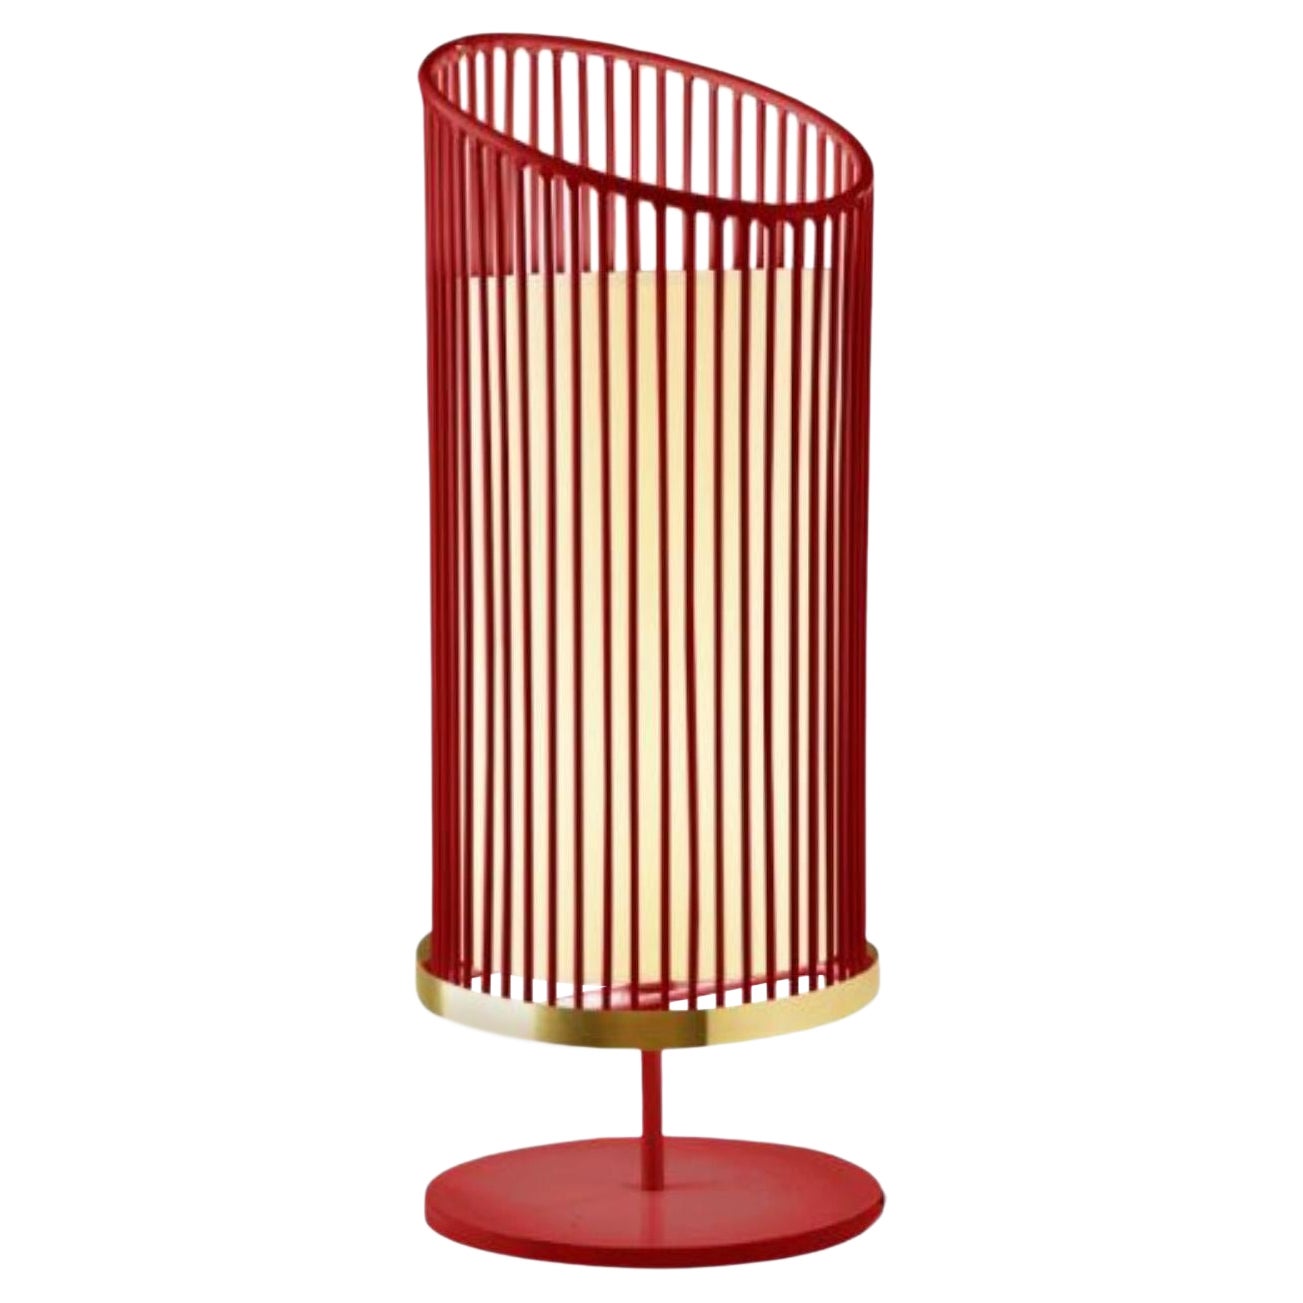 Lipstick New Spider Table Lamp with Brass Ring by Dooq